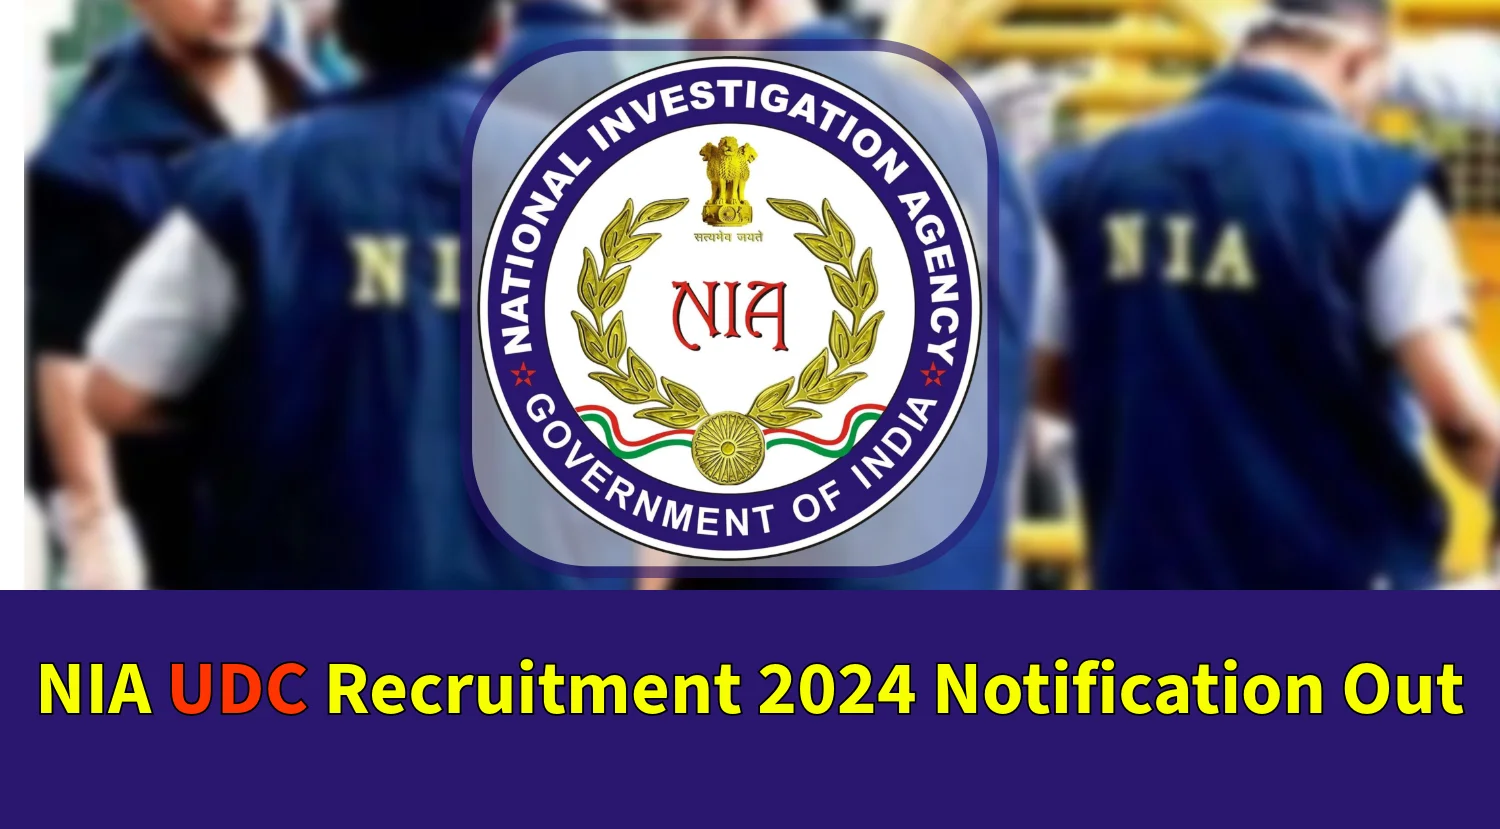 National Investigation Agency Recruitment 2024